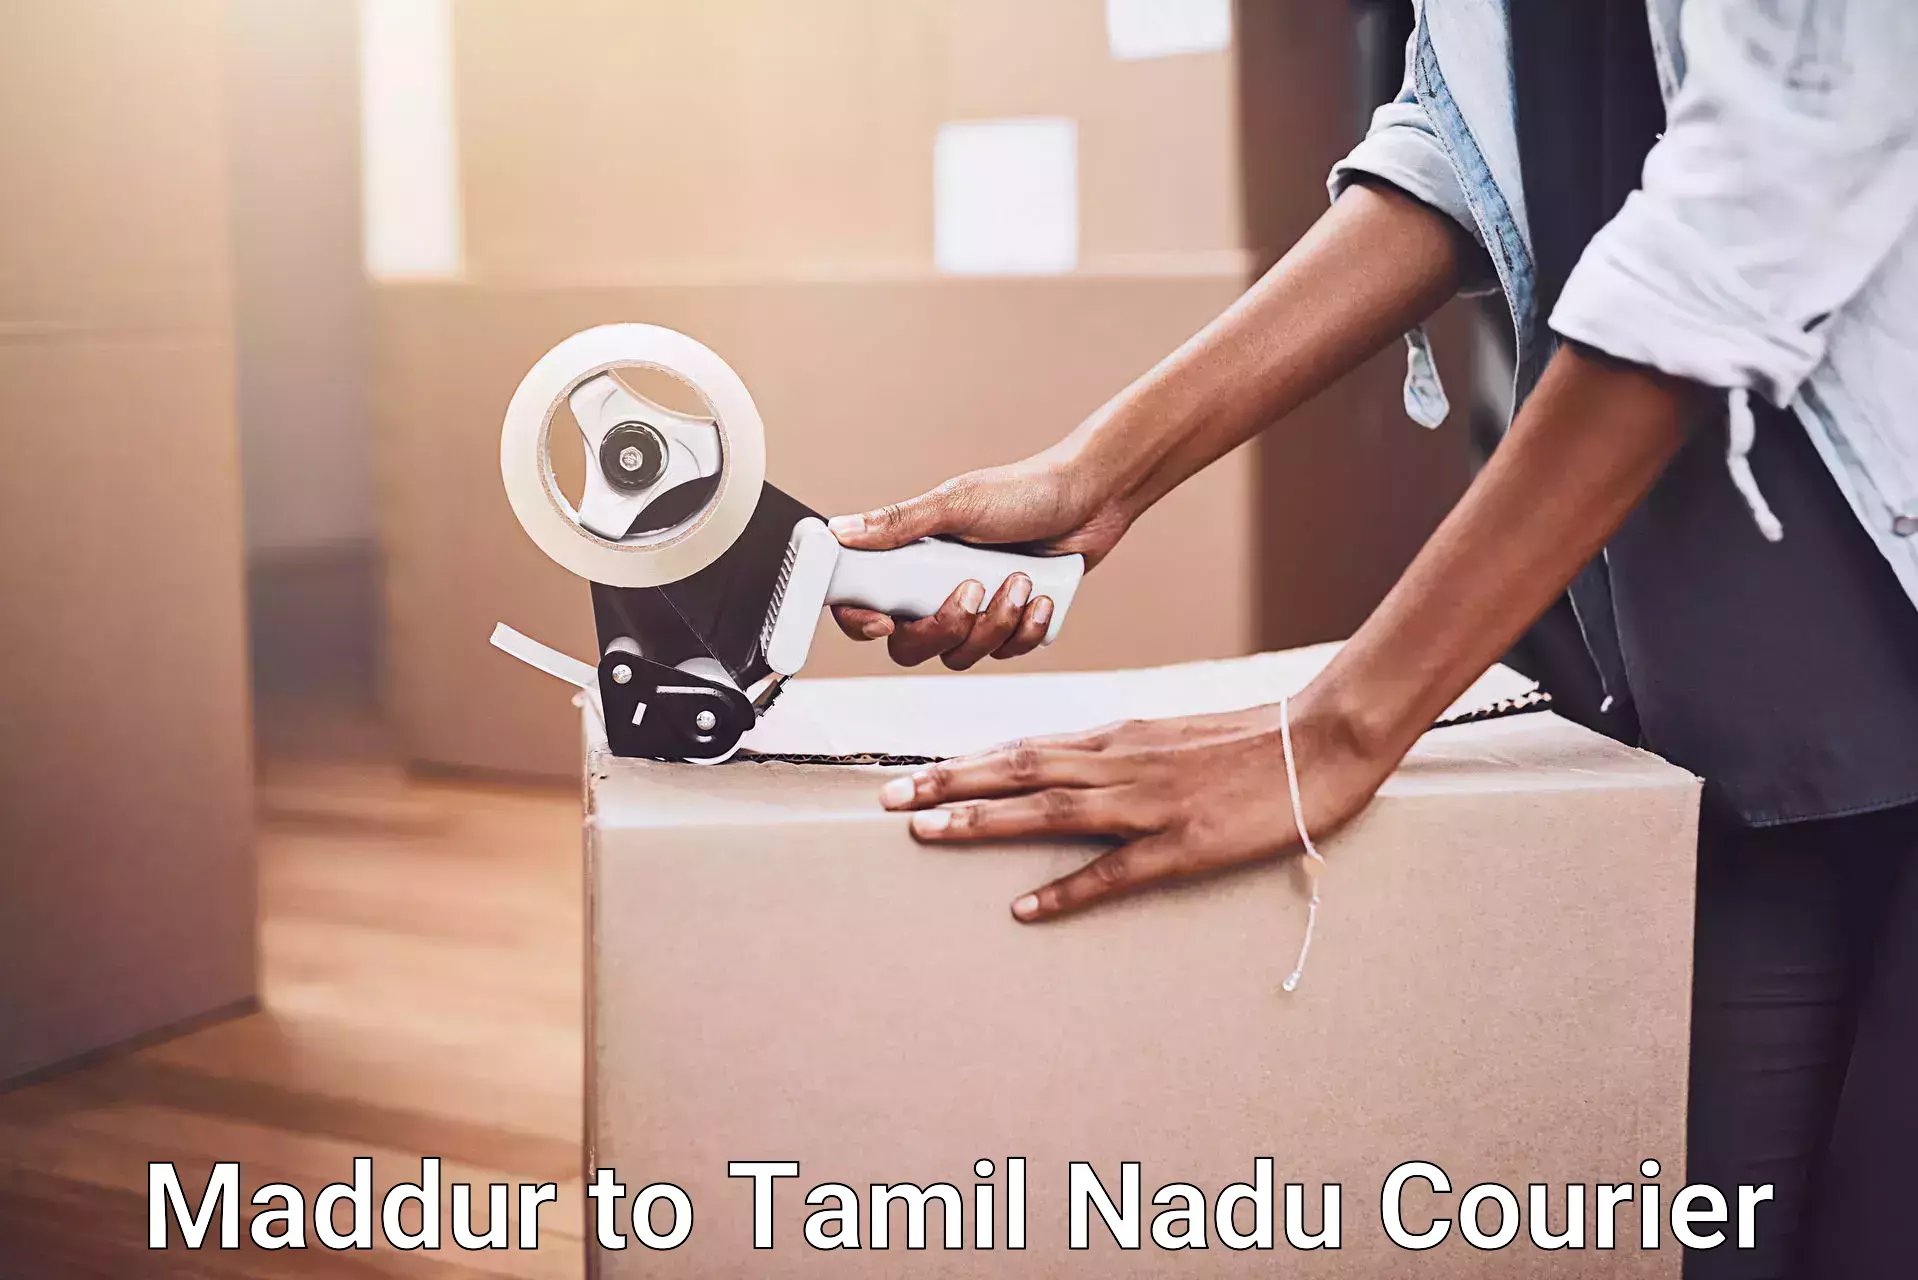 Household moving experts Maddur to Tamil Nadu